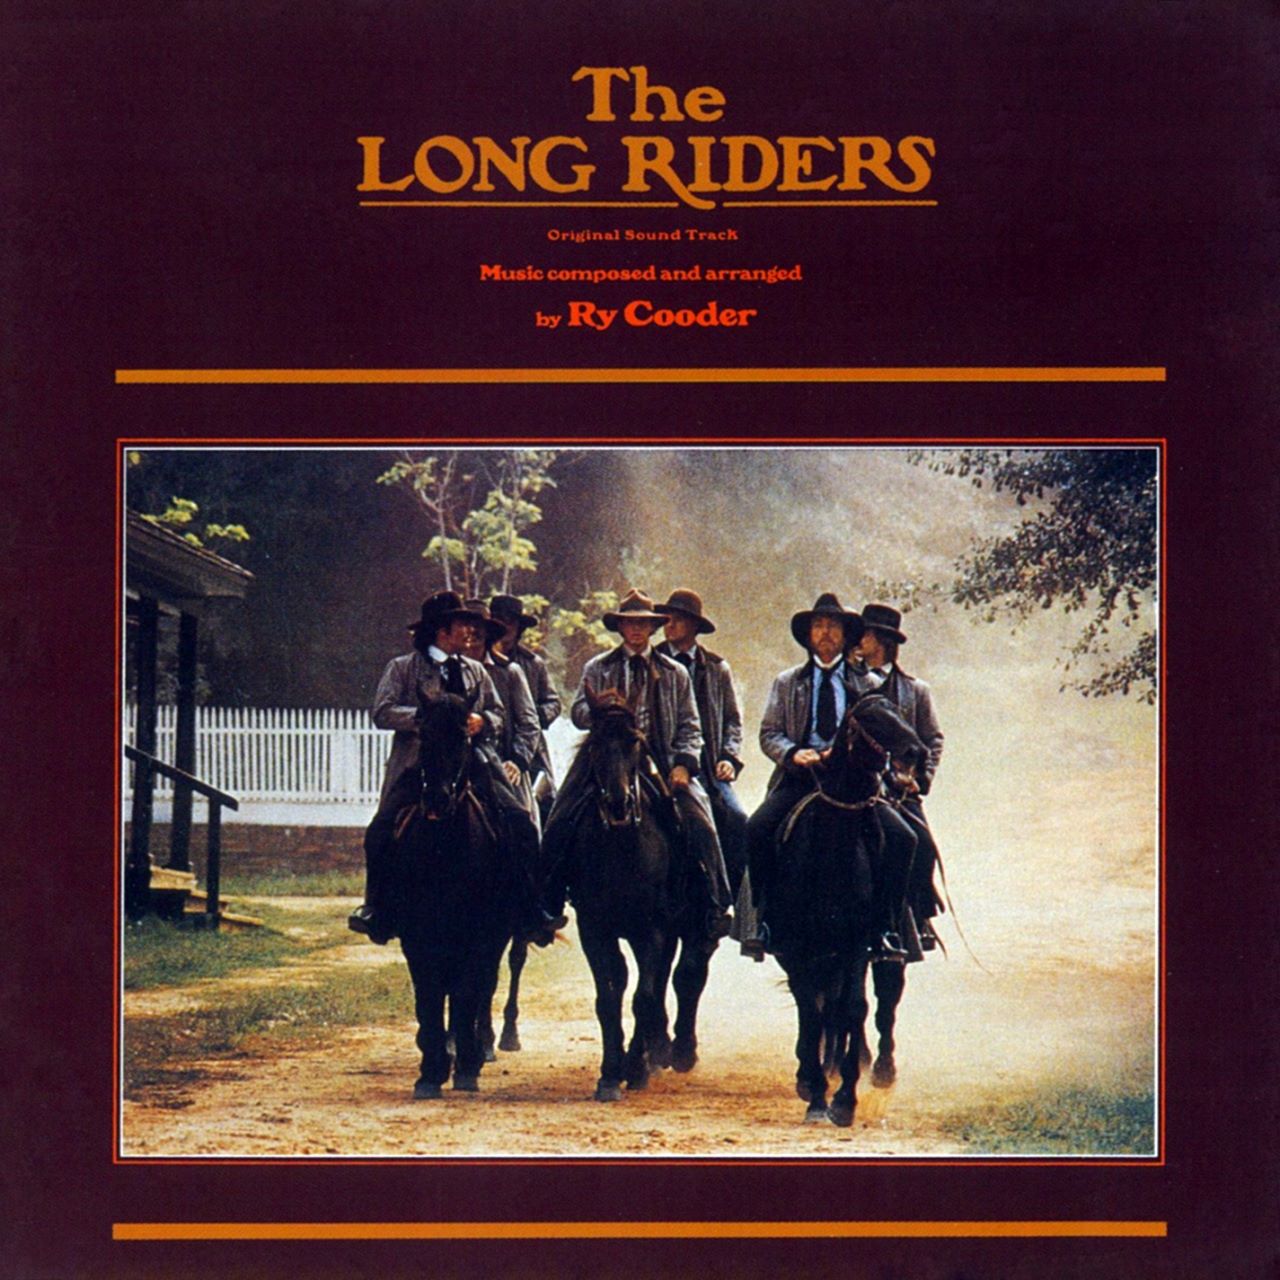 Ry Cooder - The Long Riders cover album